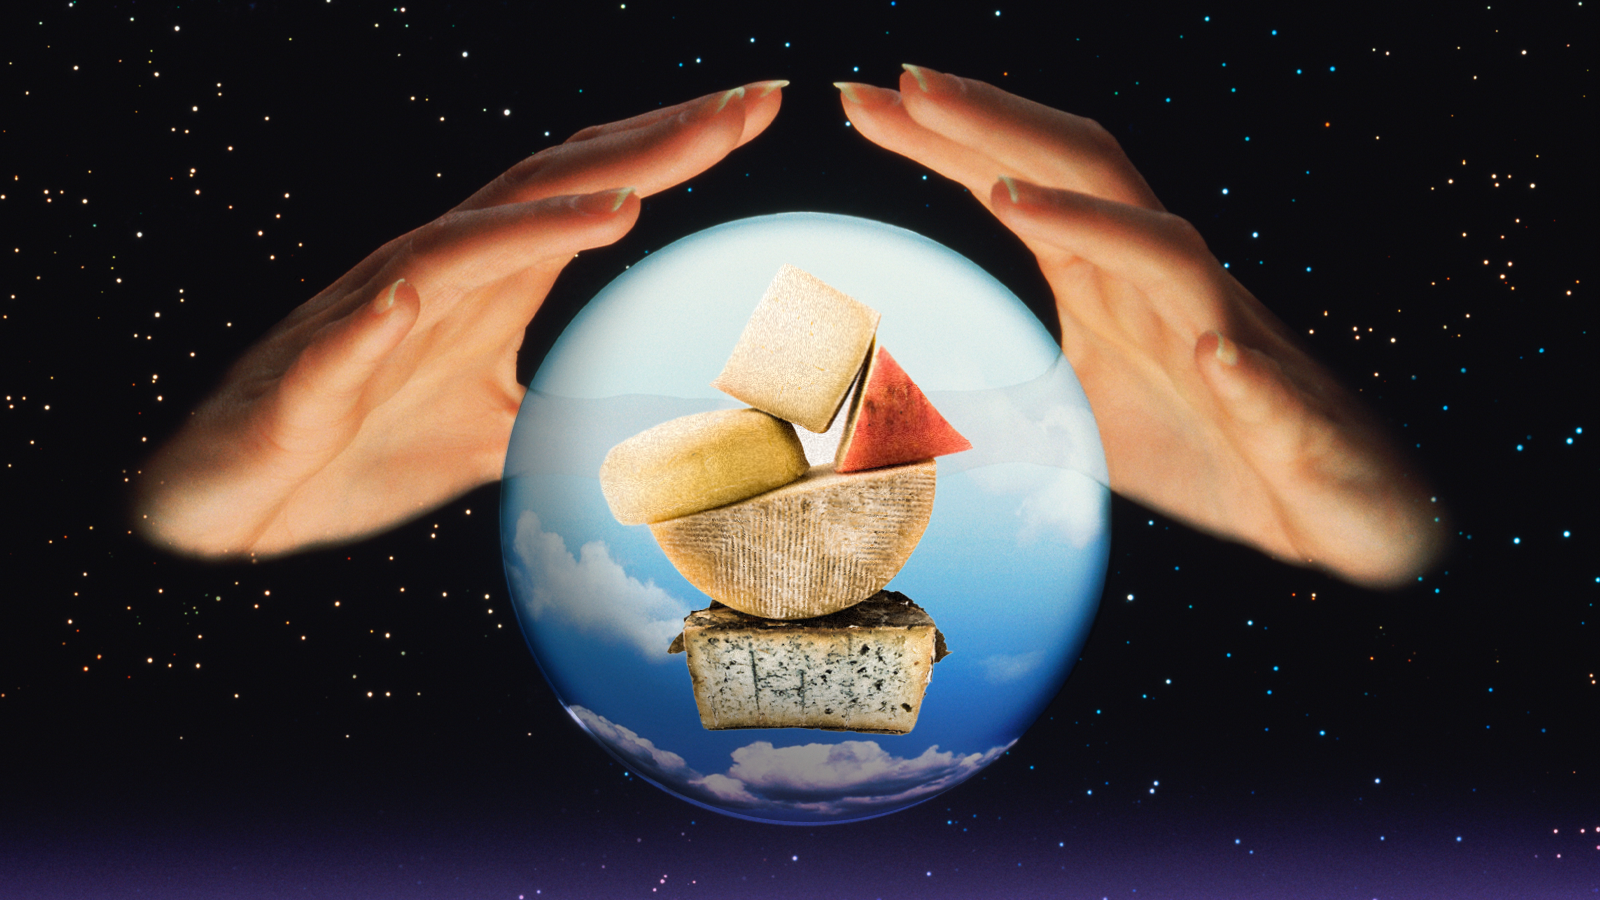 Illustration of a tower of cheese inside a crystal ball, with two hands hovering over.